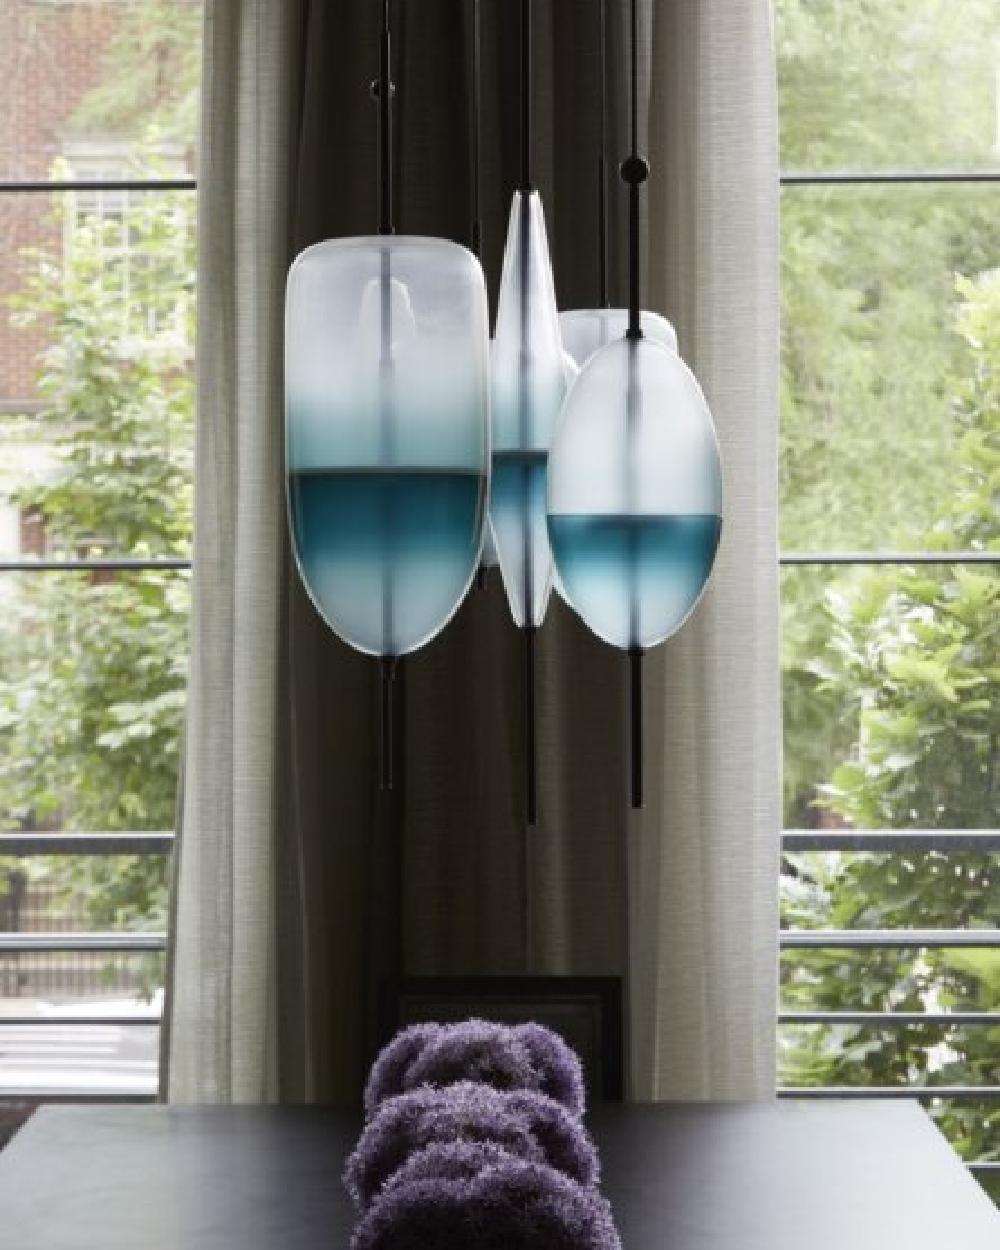 FLOW[T] S3 Pendant lamp in Turquoise by Nao Tamura for Wonderglass For Sale 4